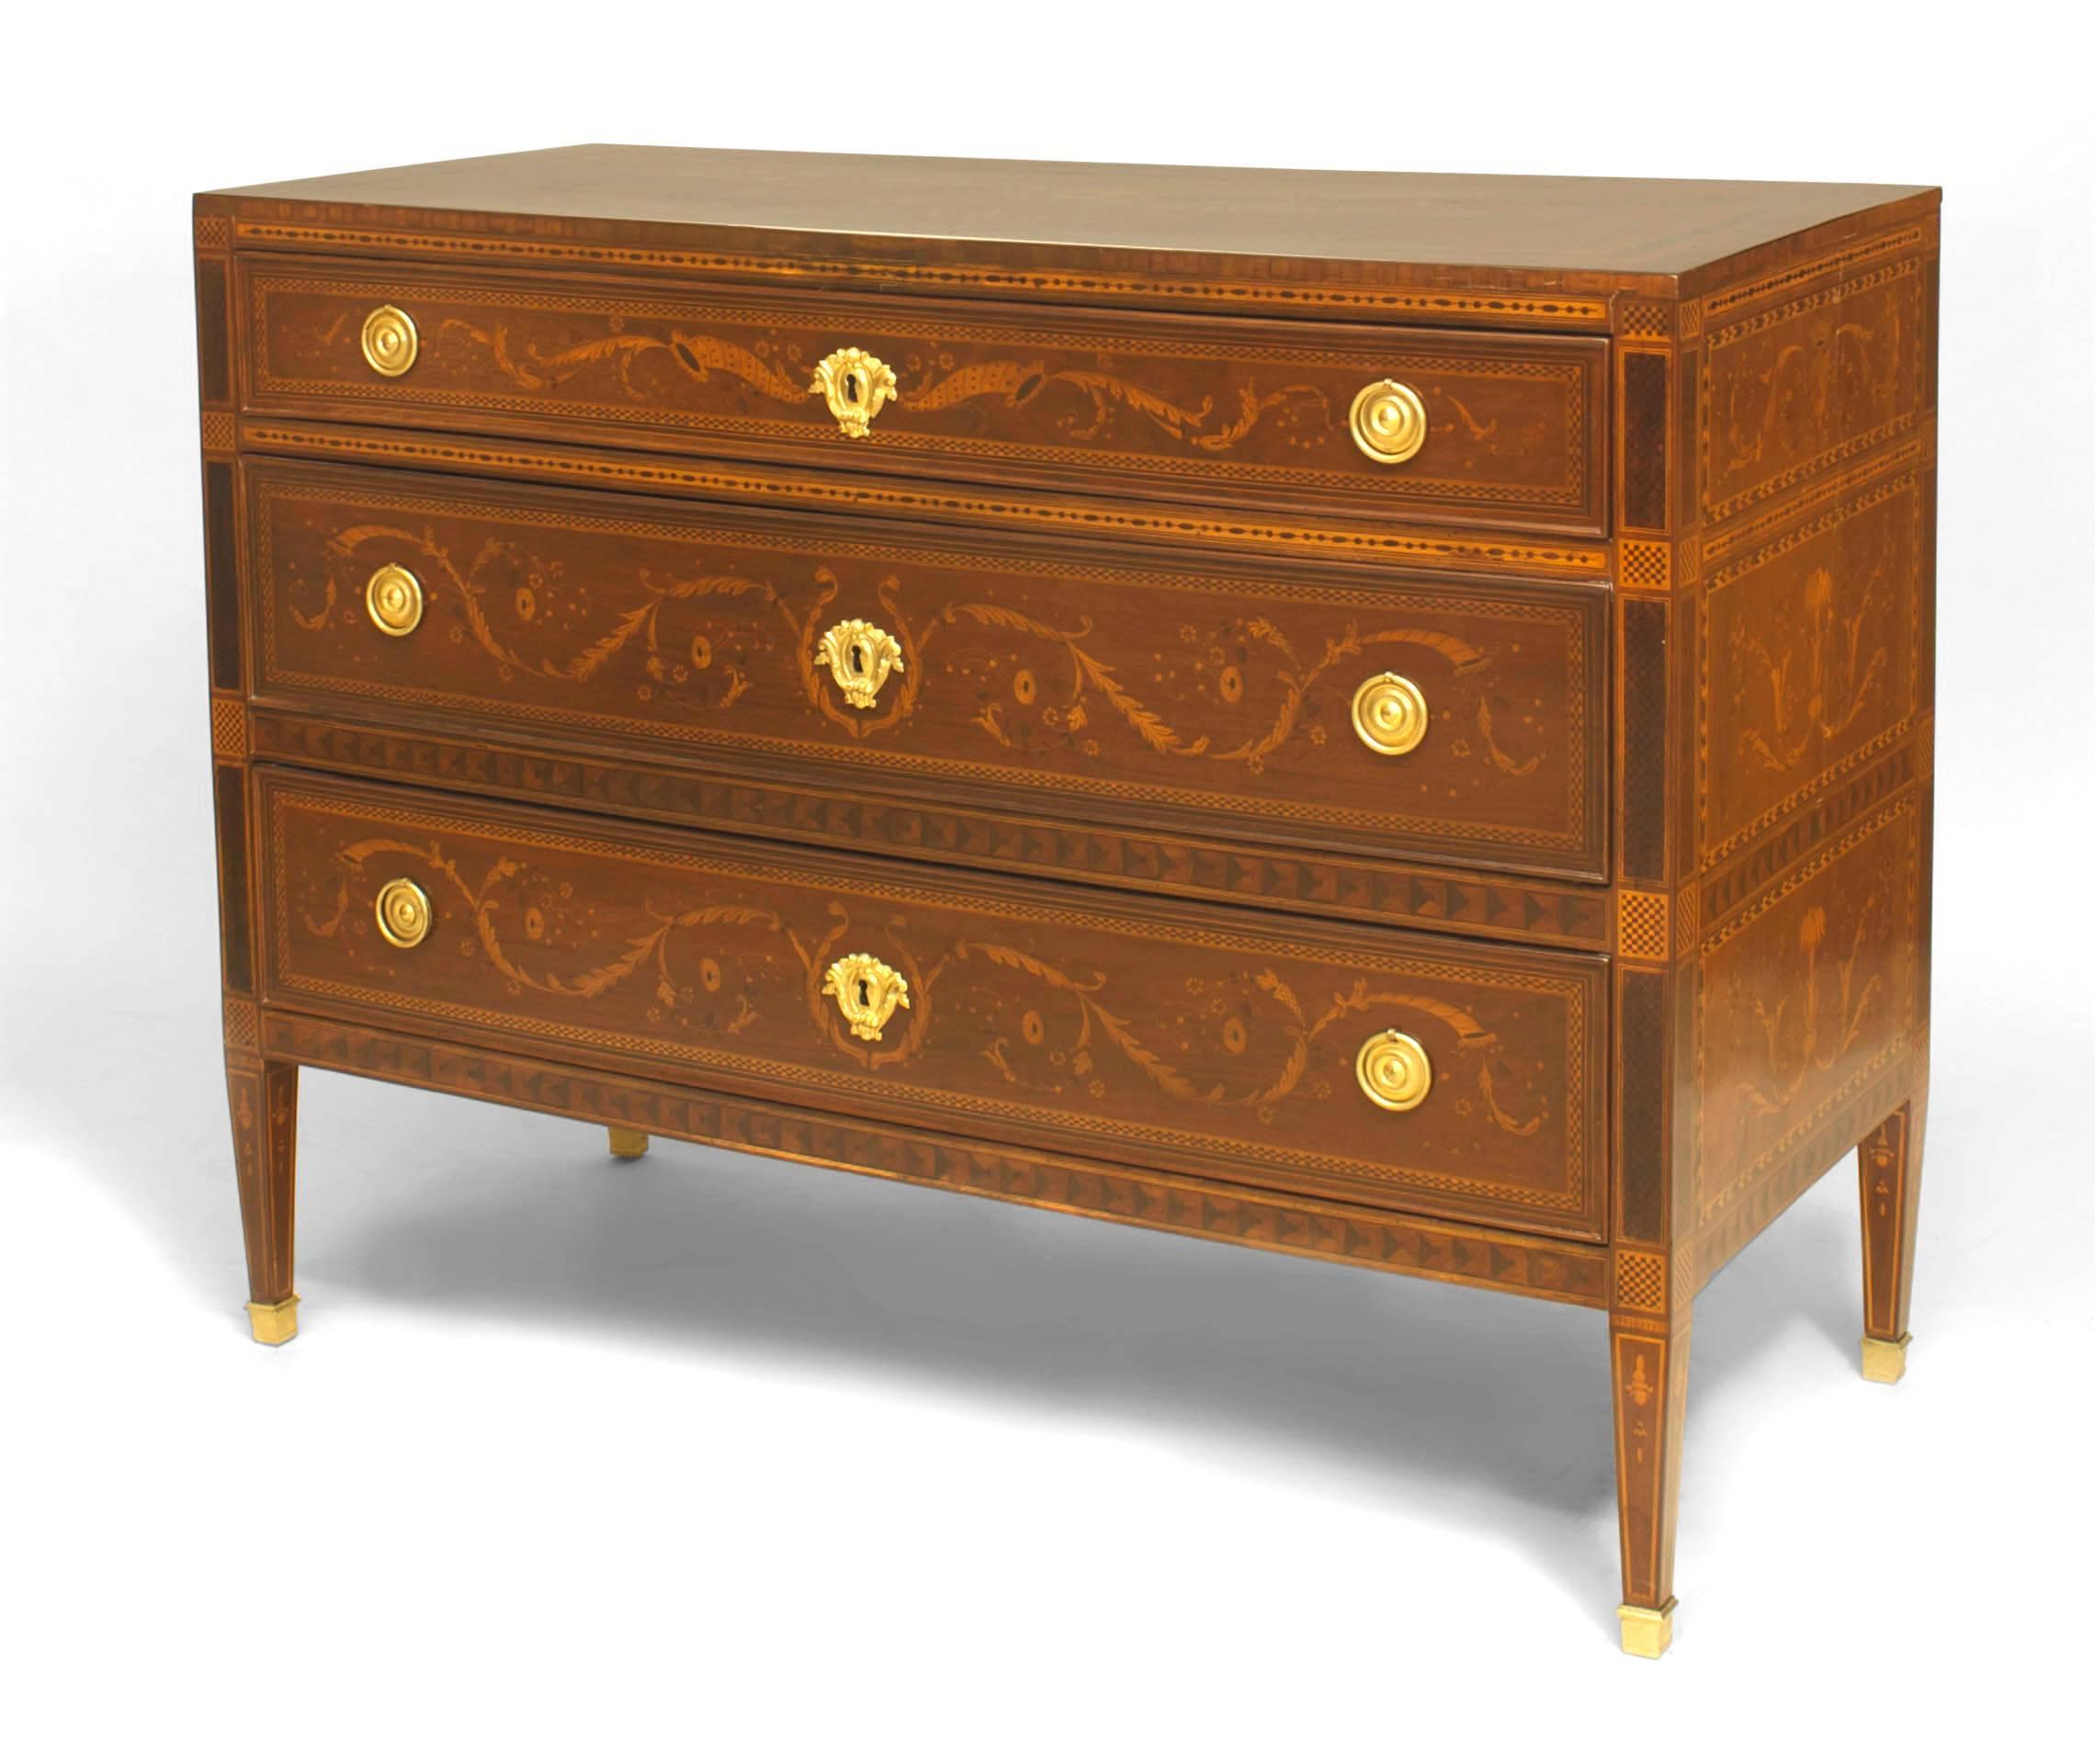 Pair of Northern Italian (late 18th Century) Neo-classical walnut and marquetry inlaid gilt bronze mounted commodes with 3 drawers (in the manner of GIUSEPPE MAGGIOLINI) (PRICED AS Pair).
